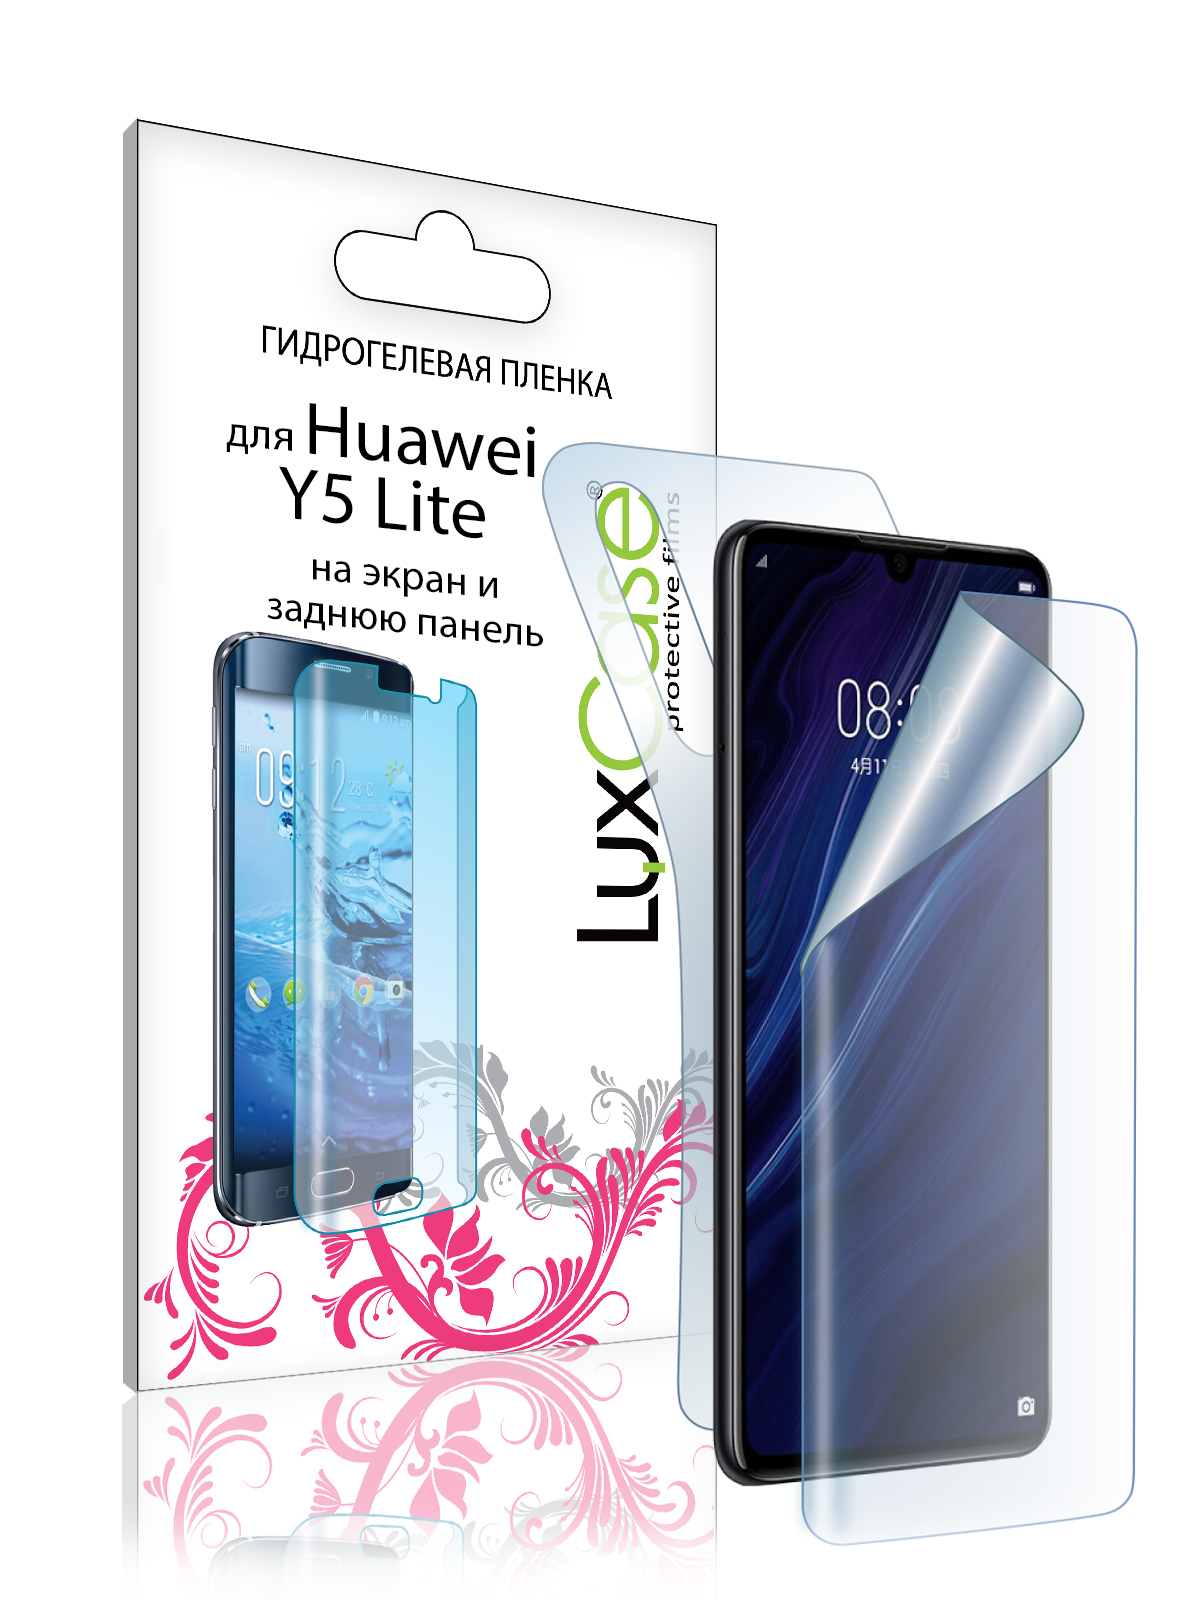 Пленка гидрогелевая LuxCase для Huawei Y5 Lite 0.14mm Front and Back Transperent Huawei Y5 Lite гидрогелевая пленка luxcase для oppo reno 5 lite 0 14mm front and back transperent 86690